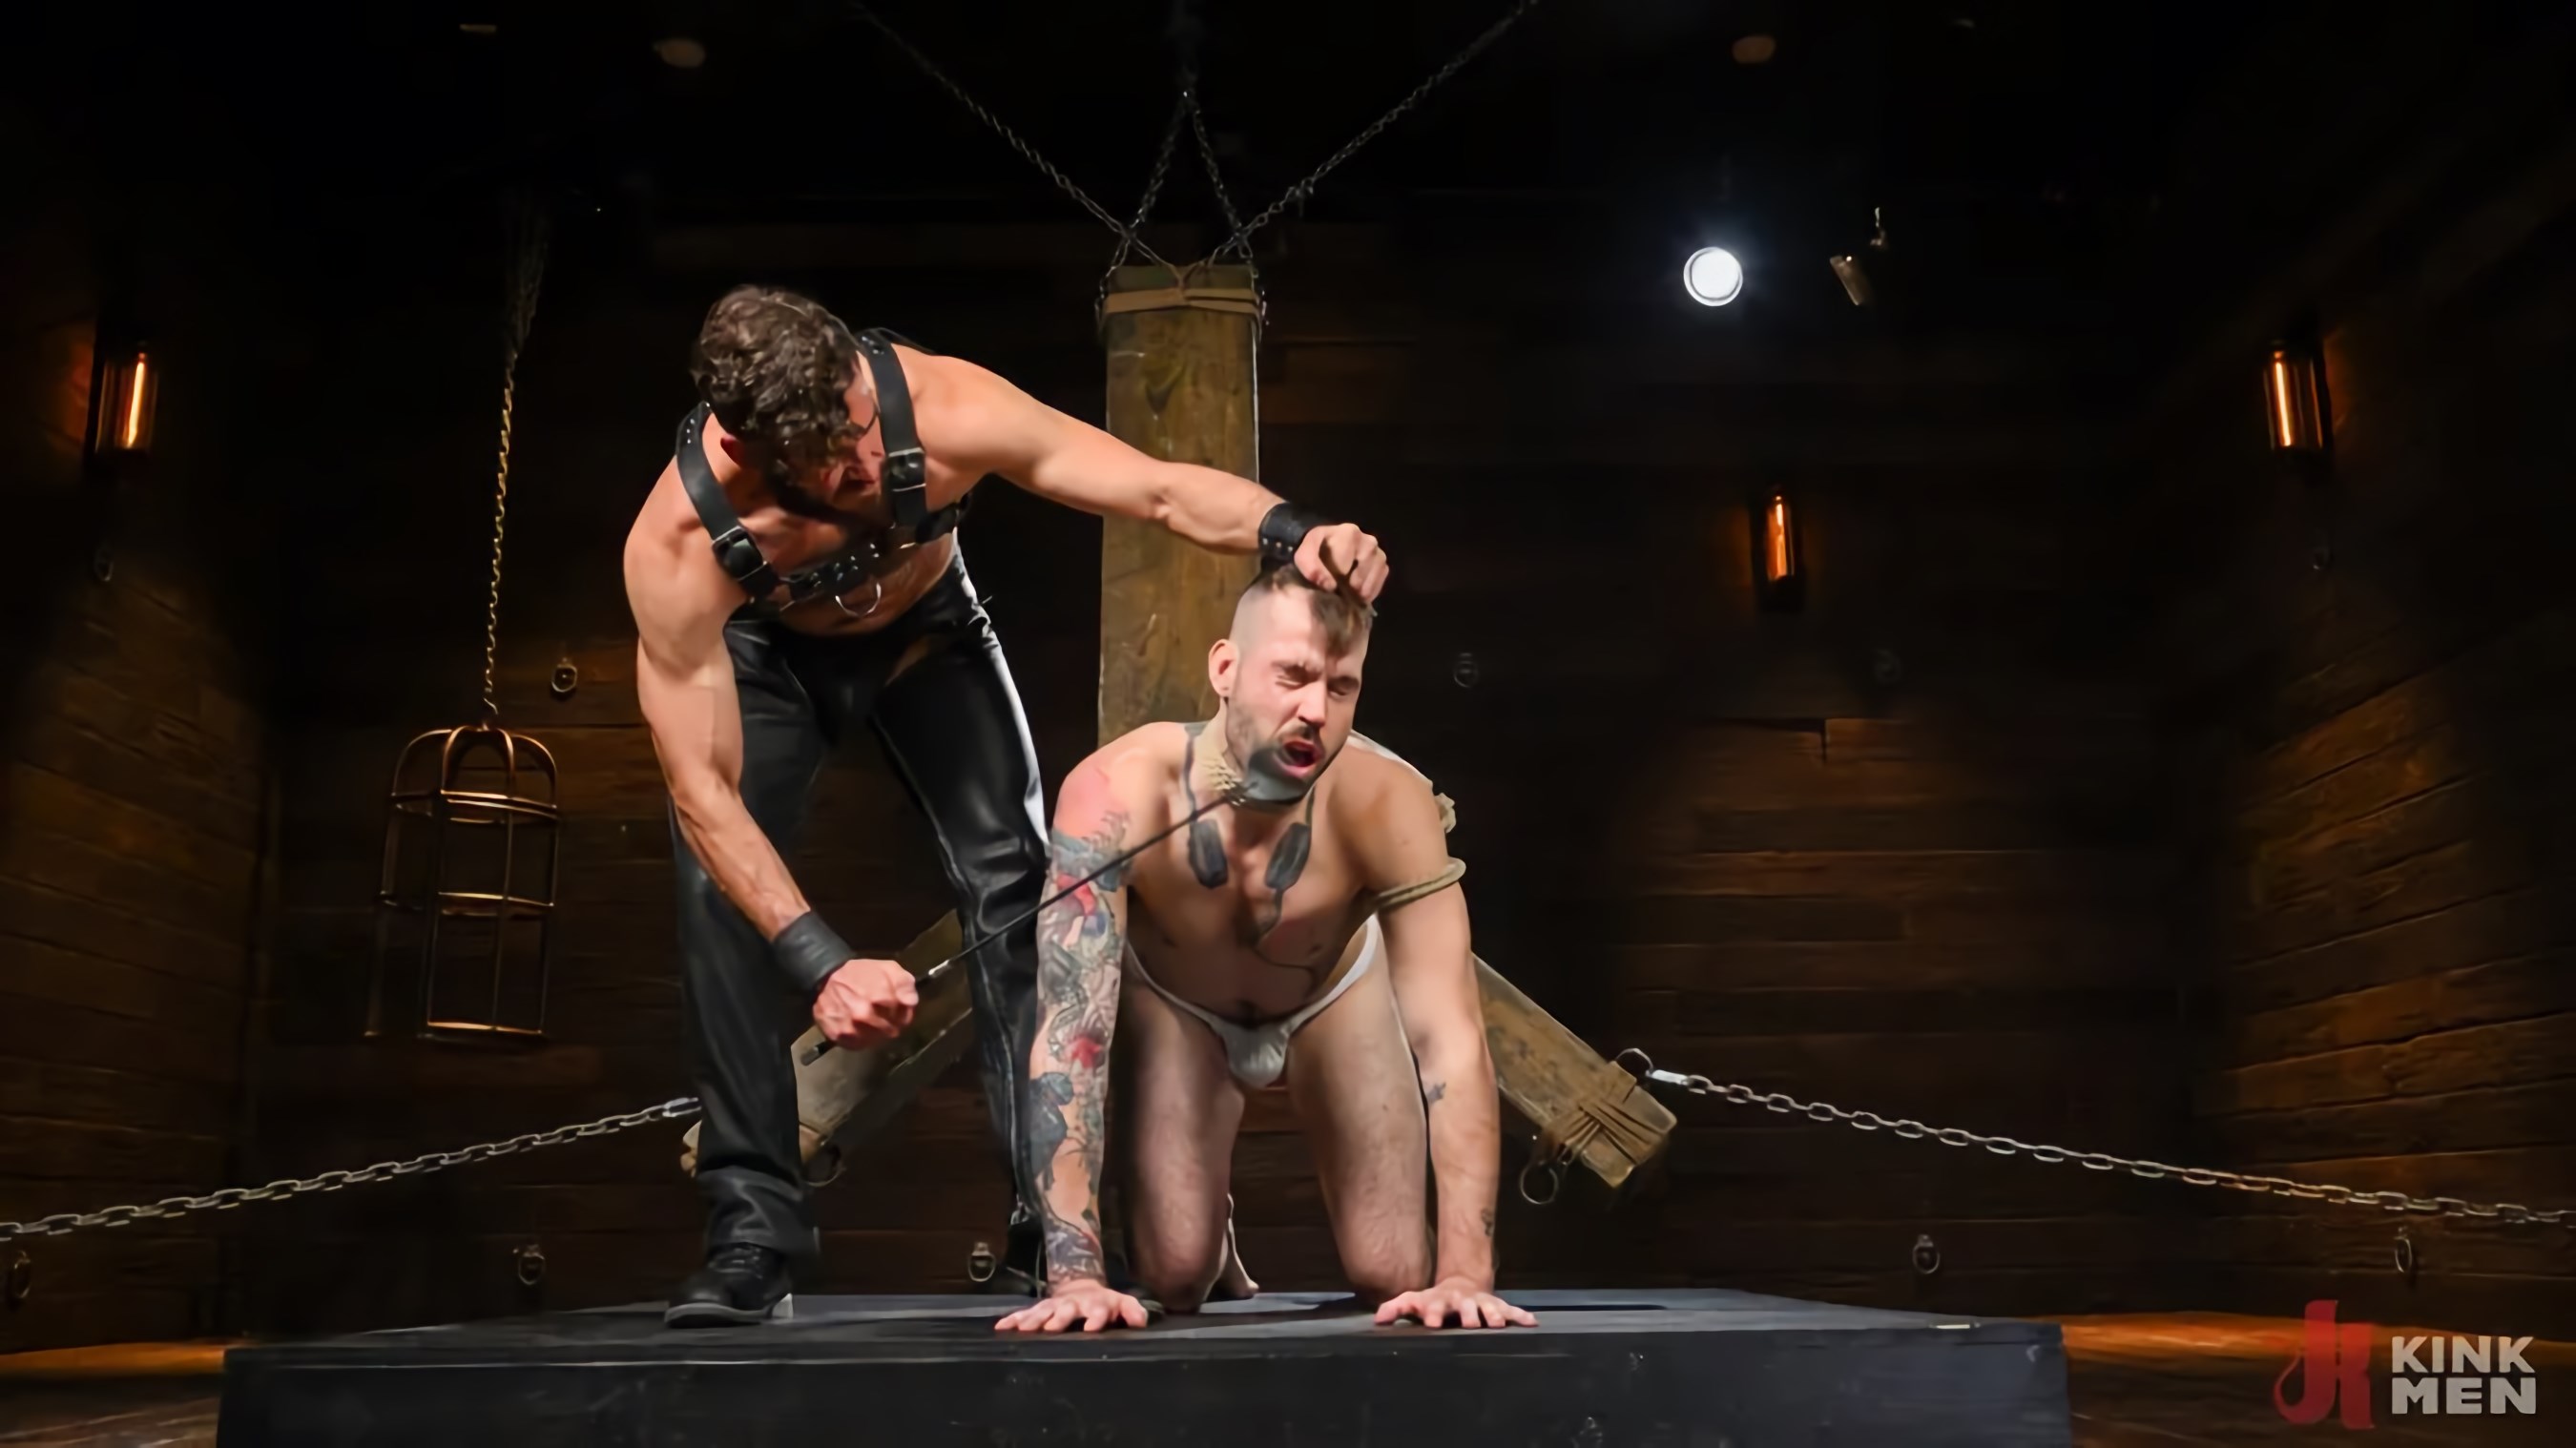 Kink Men 'TURTLE BOY: Buck Richards is fucked, flogged and bound in a metal cage and renamed Turtle Boy by Vander Pulaski' starring Vander Pulaski (Photo 3)